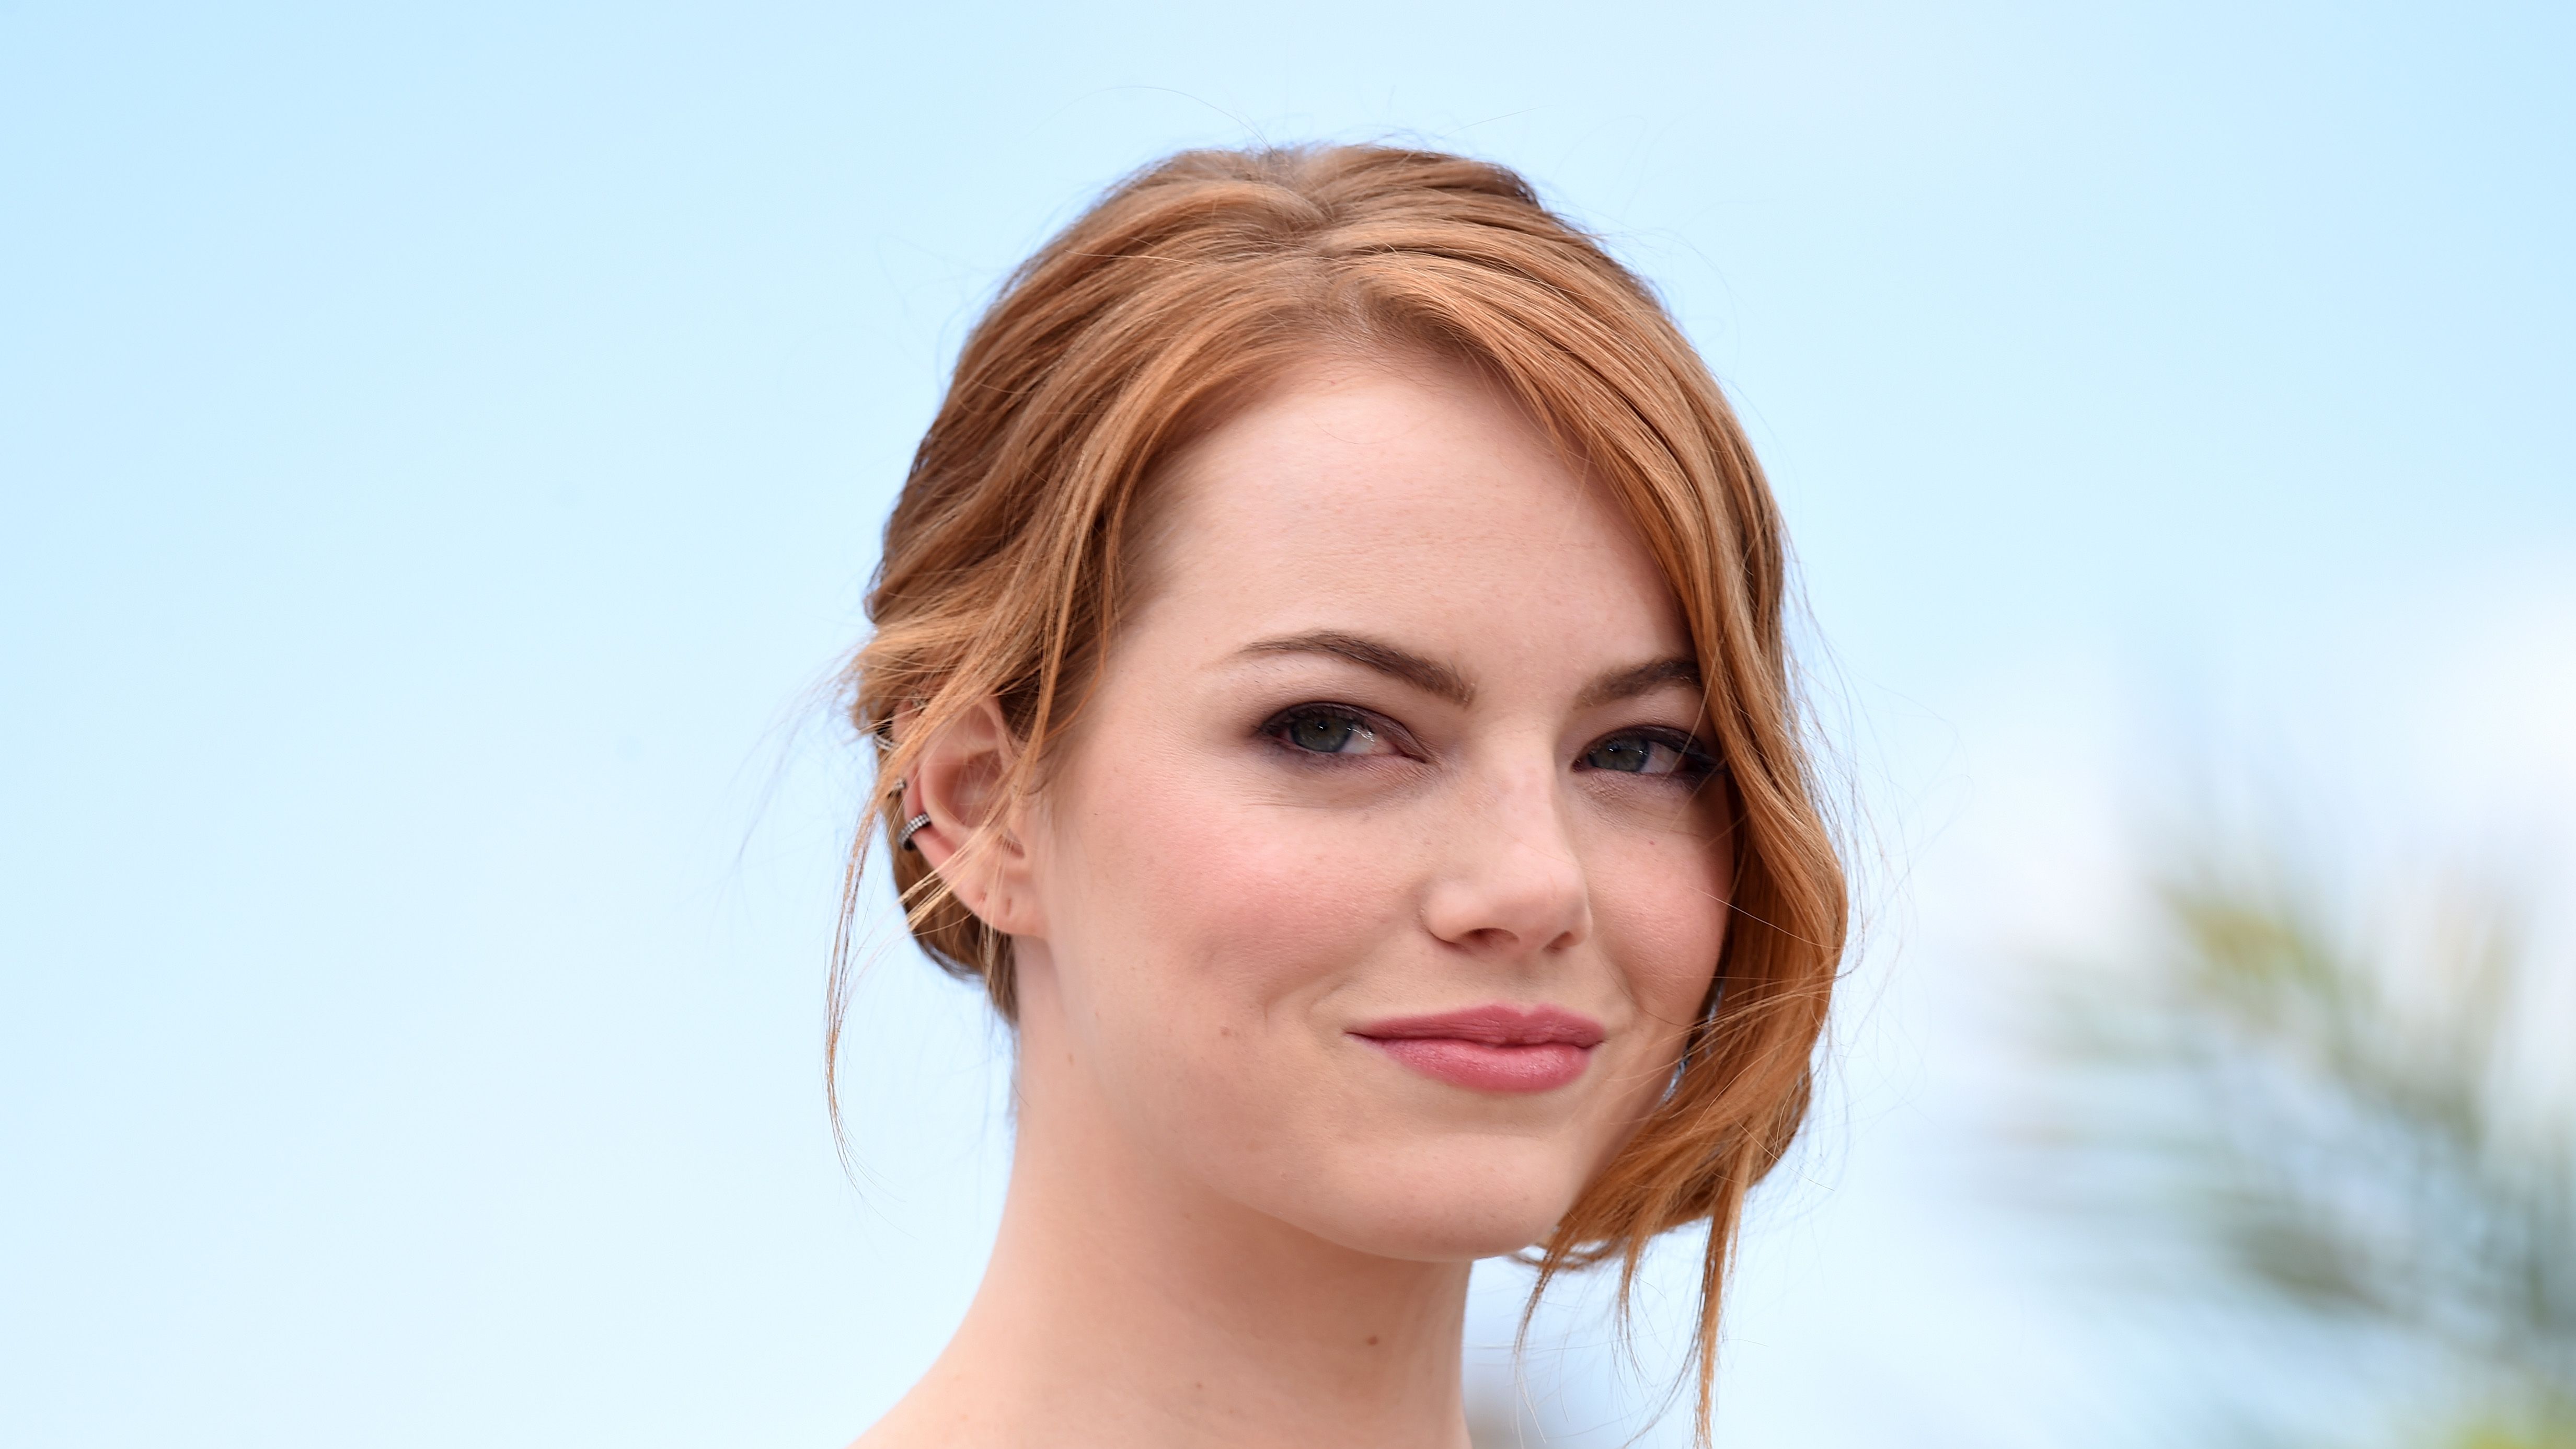 Get The Look: Emma Stone's Hair And Makeup At The 2012 Met Ball